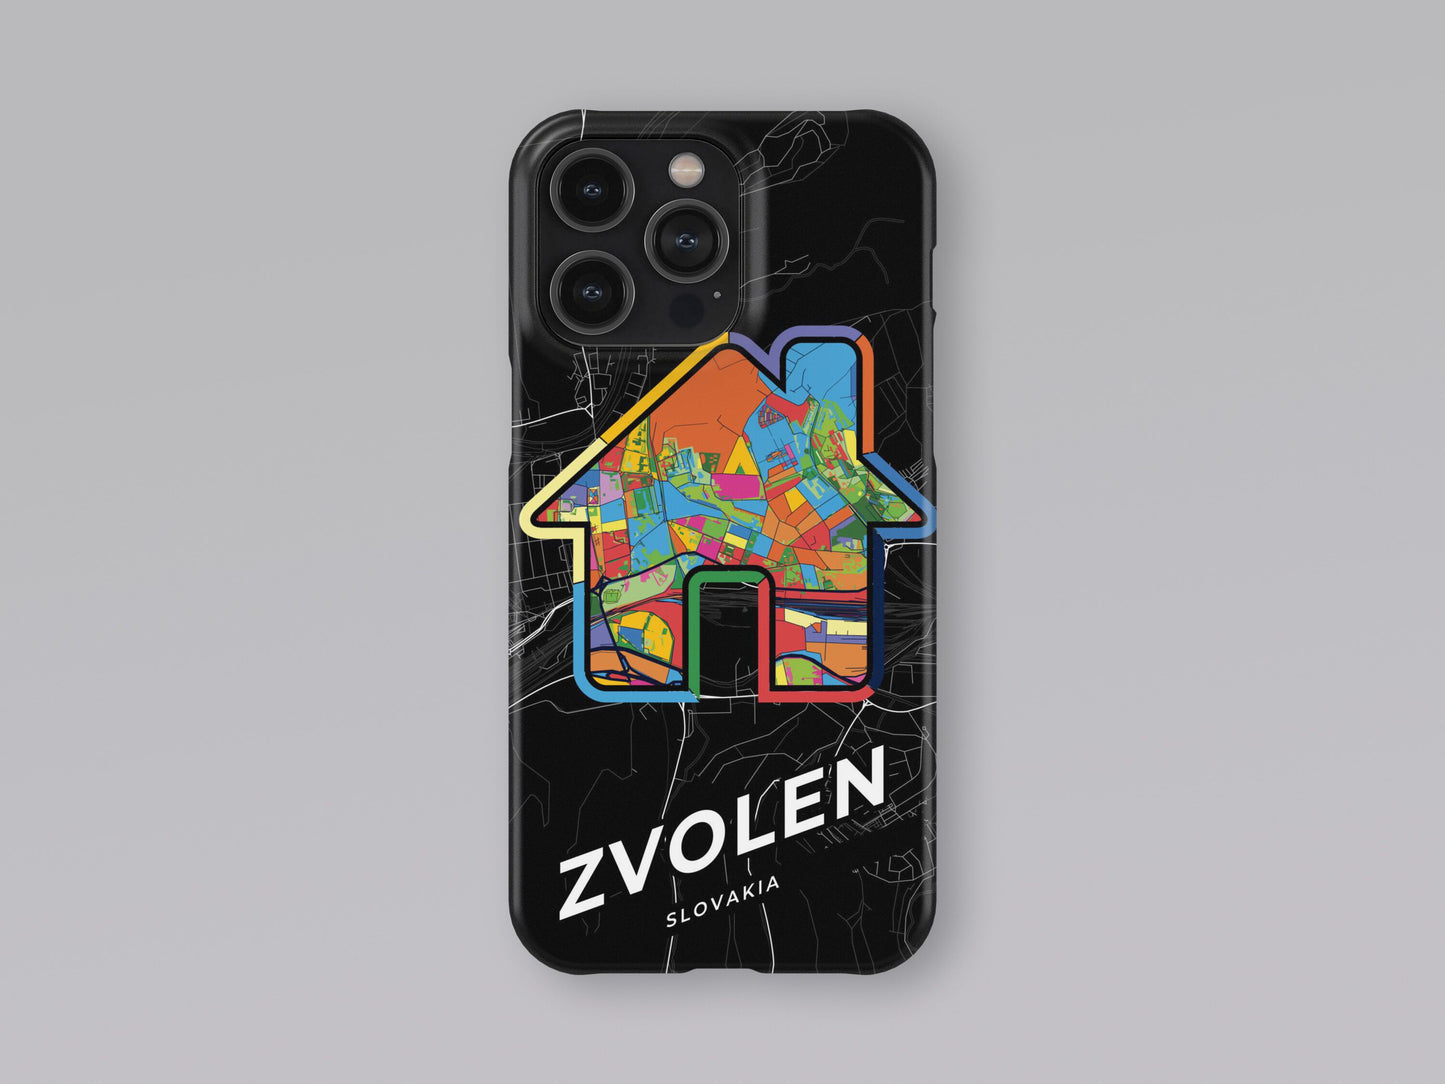 Zvolen Slovakia slim phone case with colorful icon. Birthday, wedding or housewarming gift. Couple match cases. 3